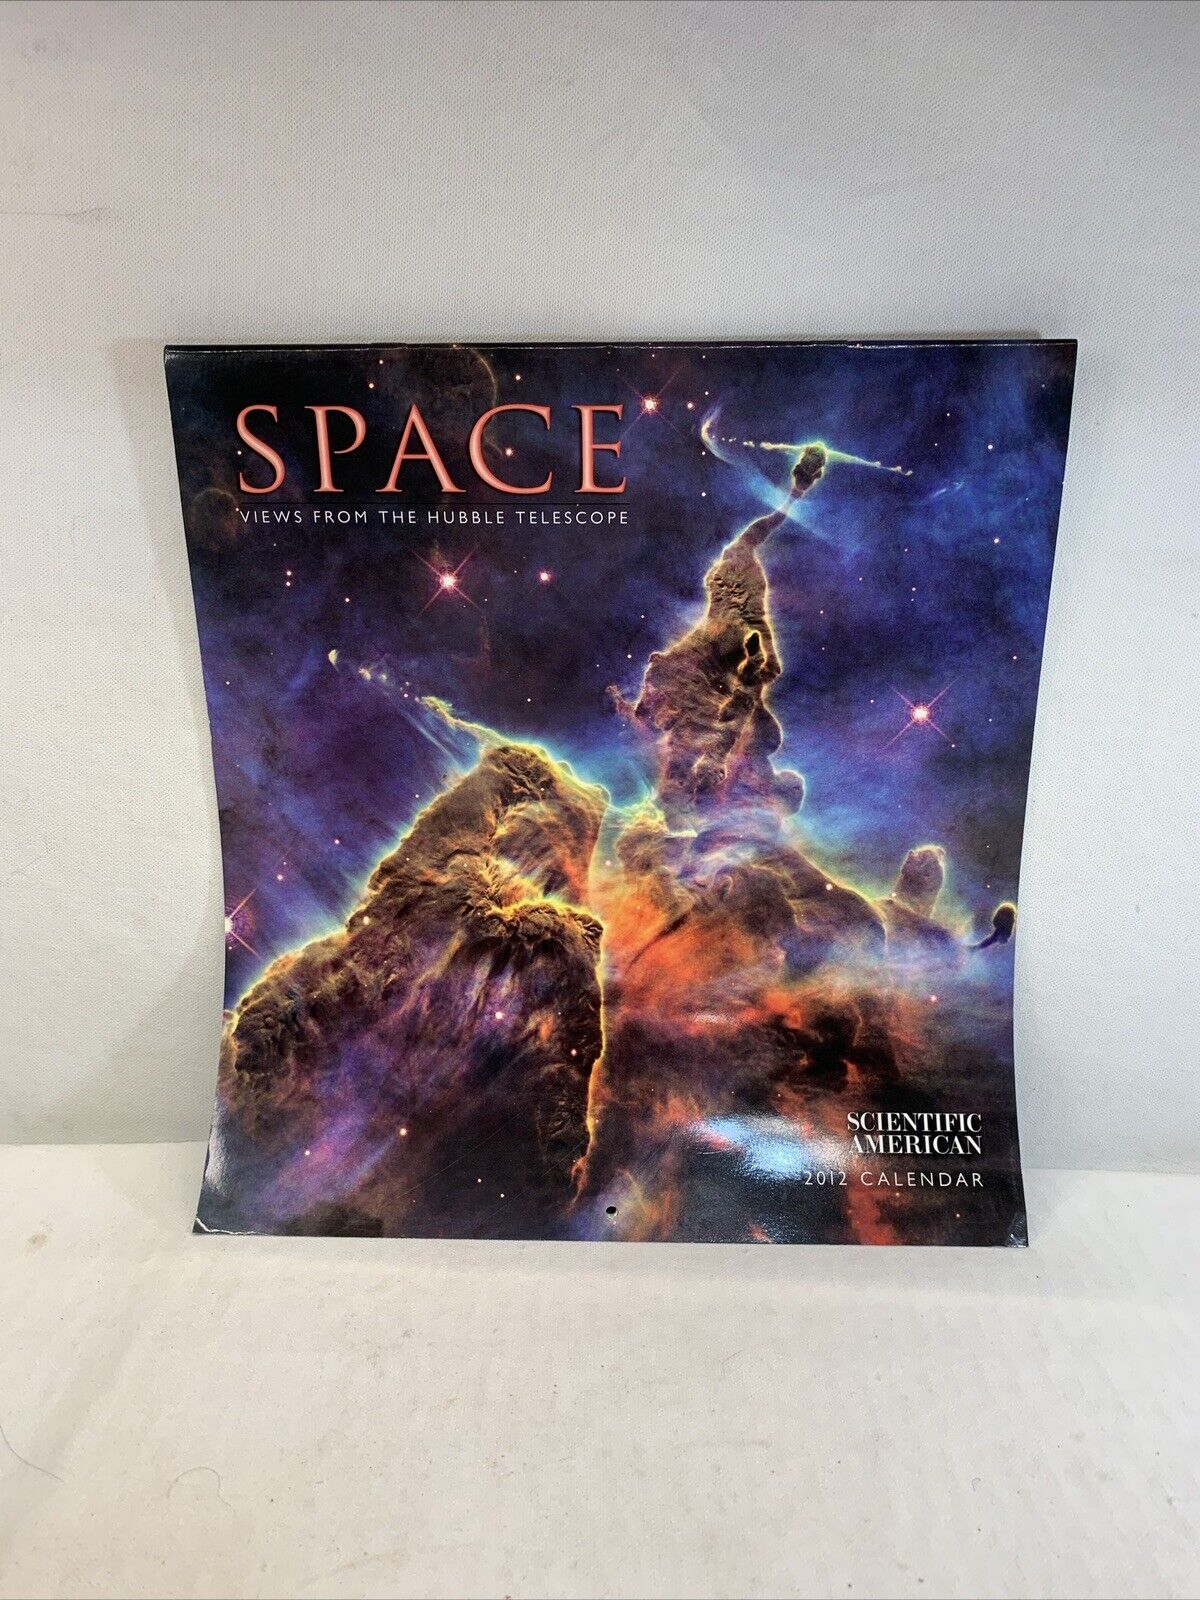 NEW SPACE VIEWS FROM THE HUBBLE TELESCOPE SCIENTIFIC AMERICAN 2012 CALENDER